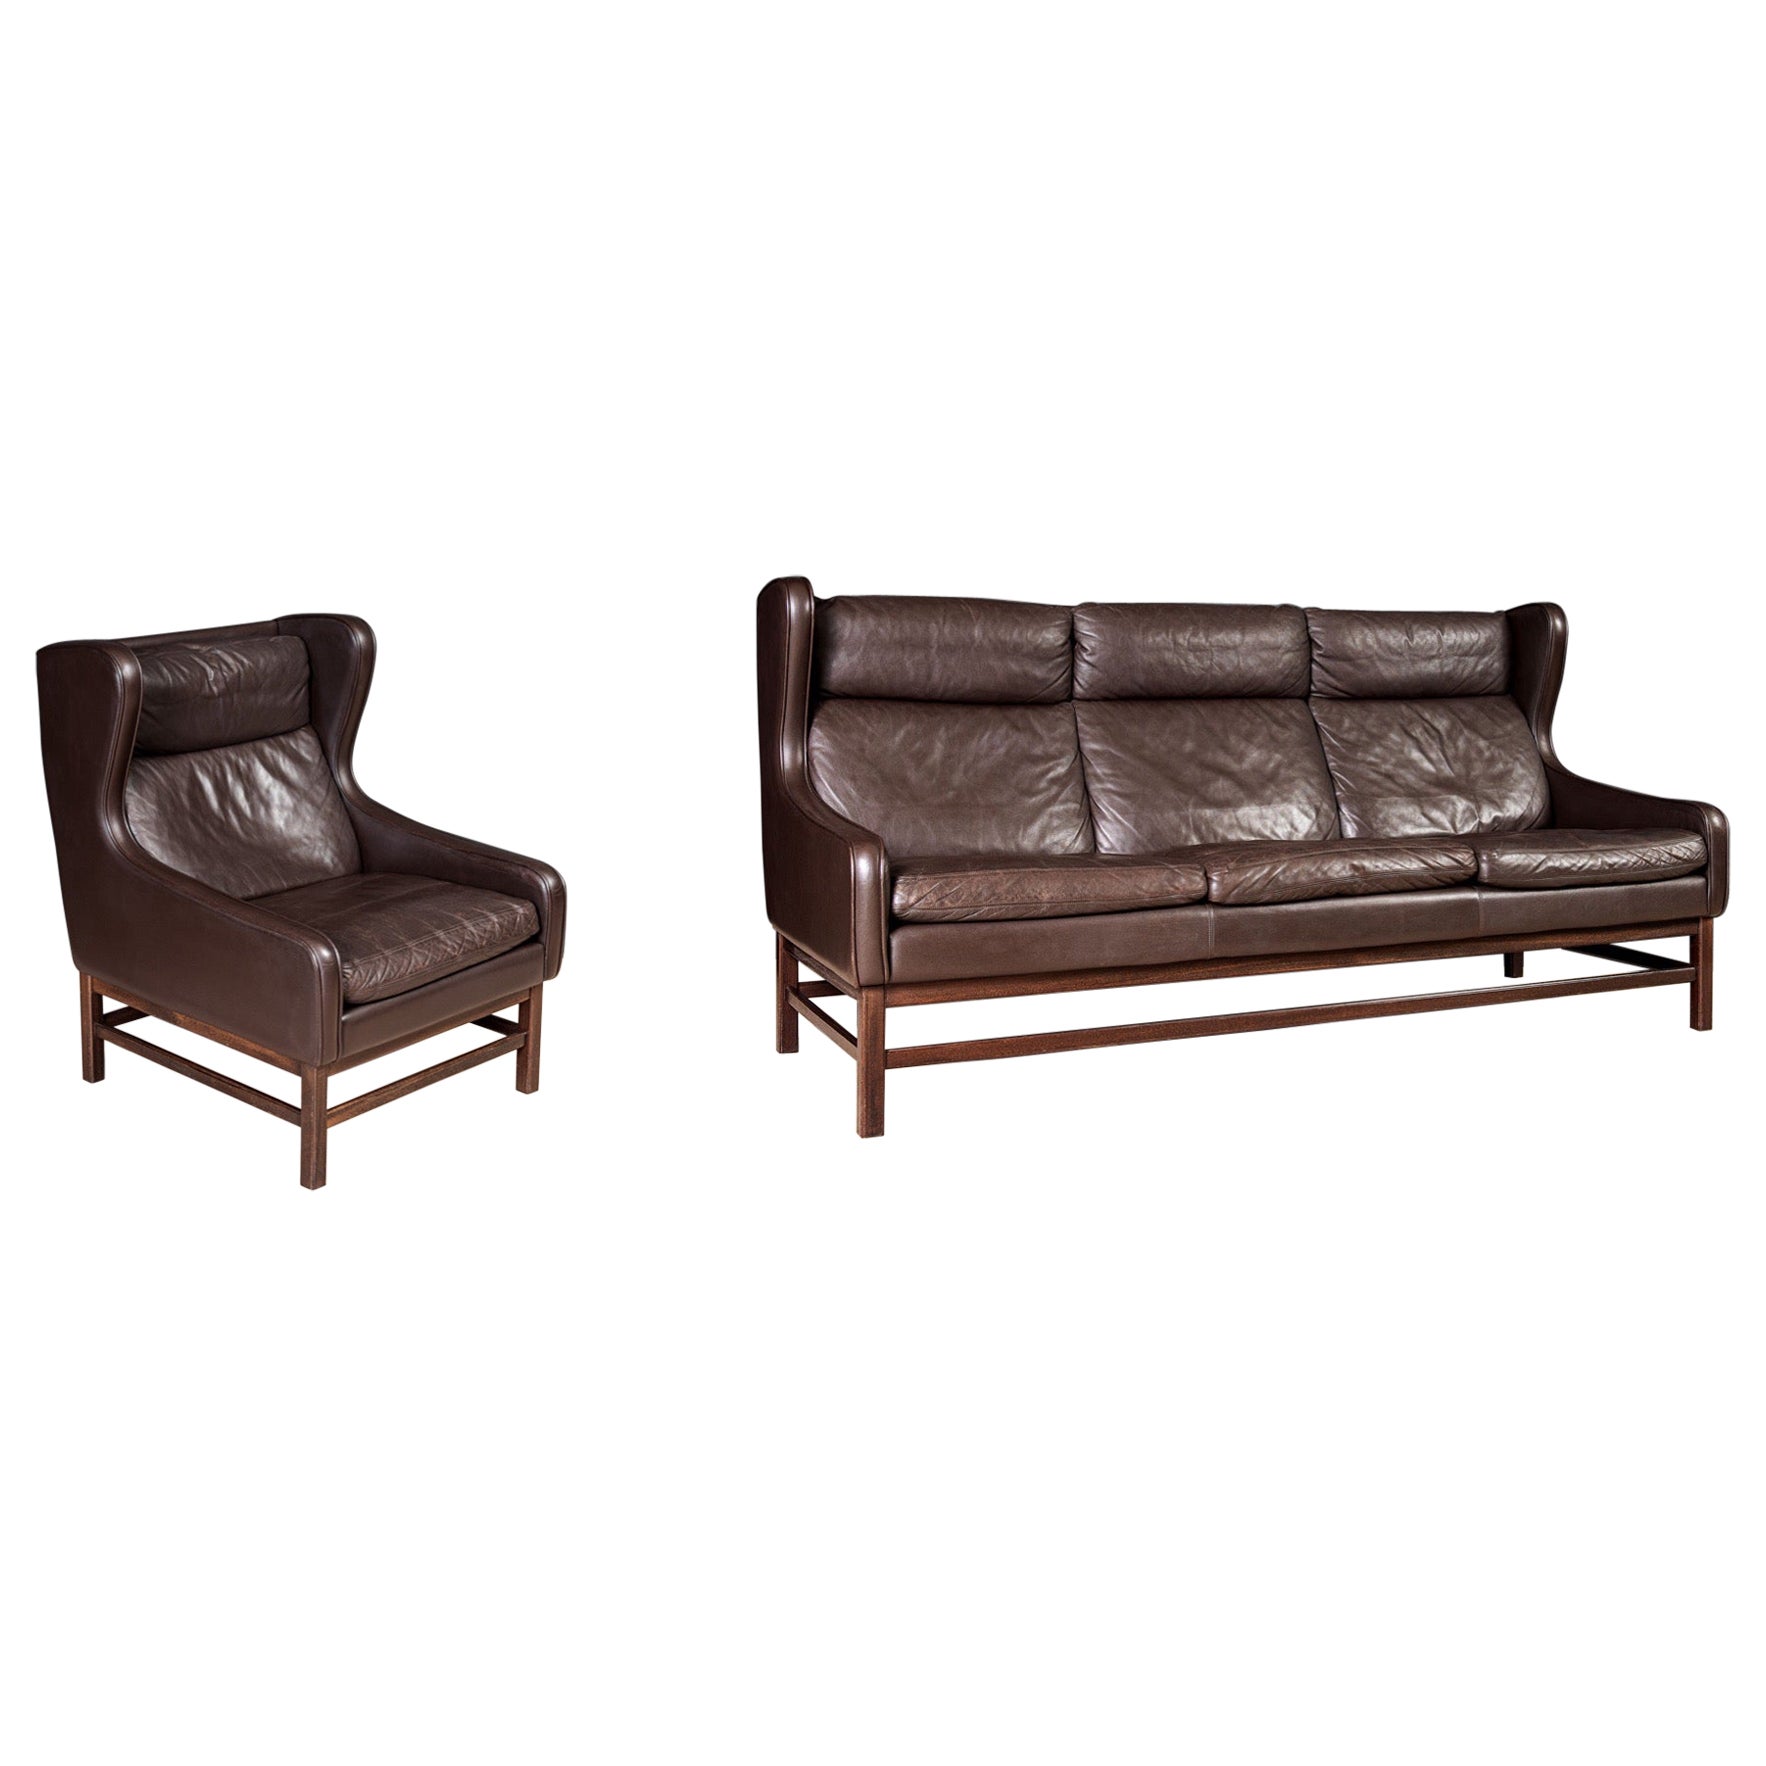 Danish Leather 3 Seater Sofa and Chair Set